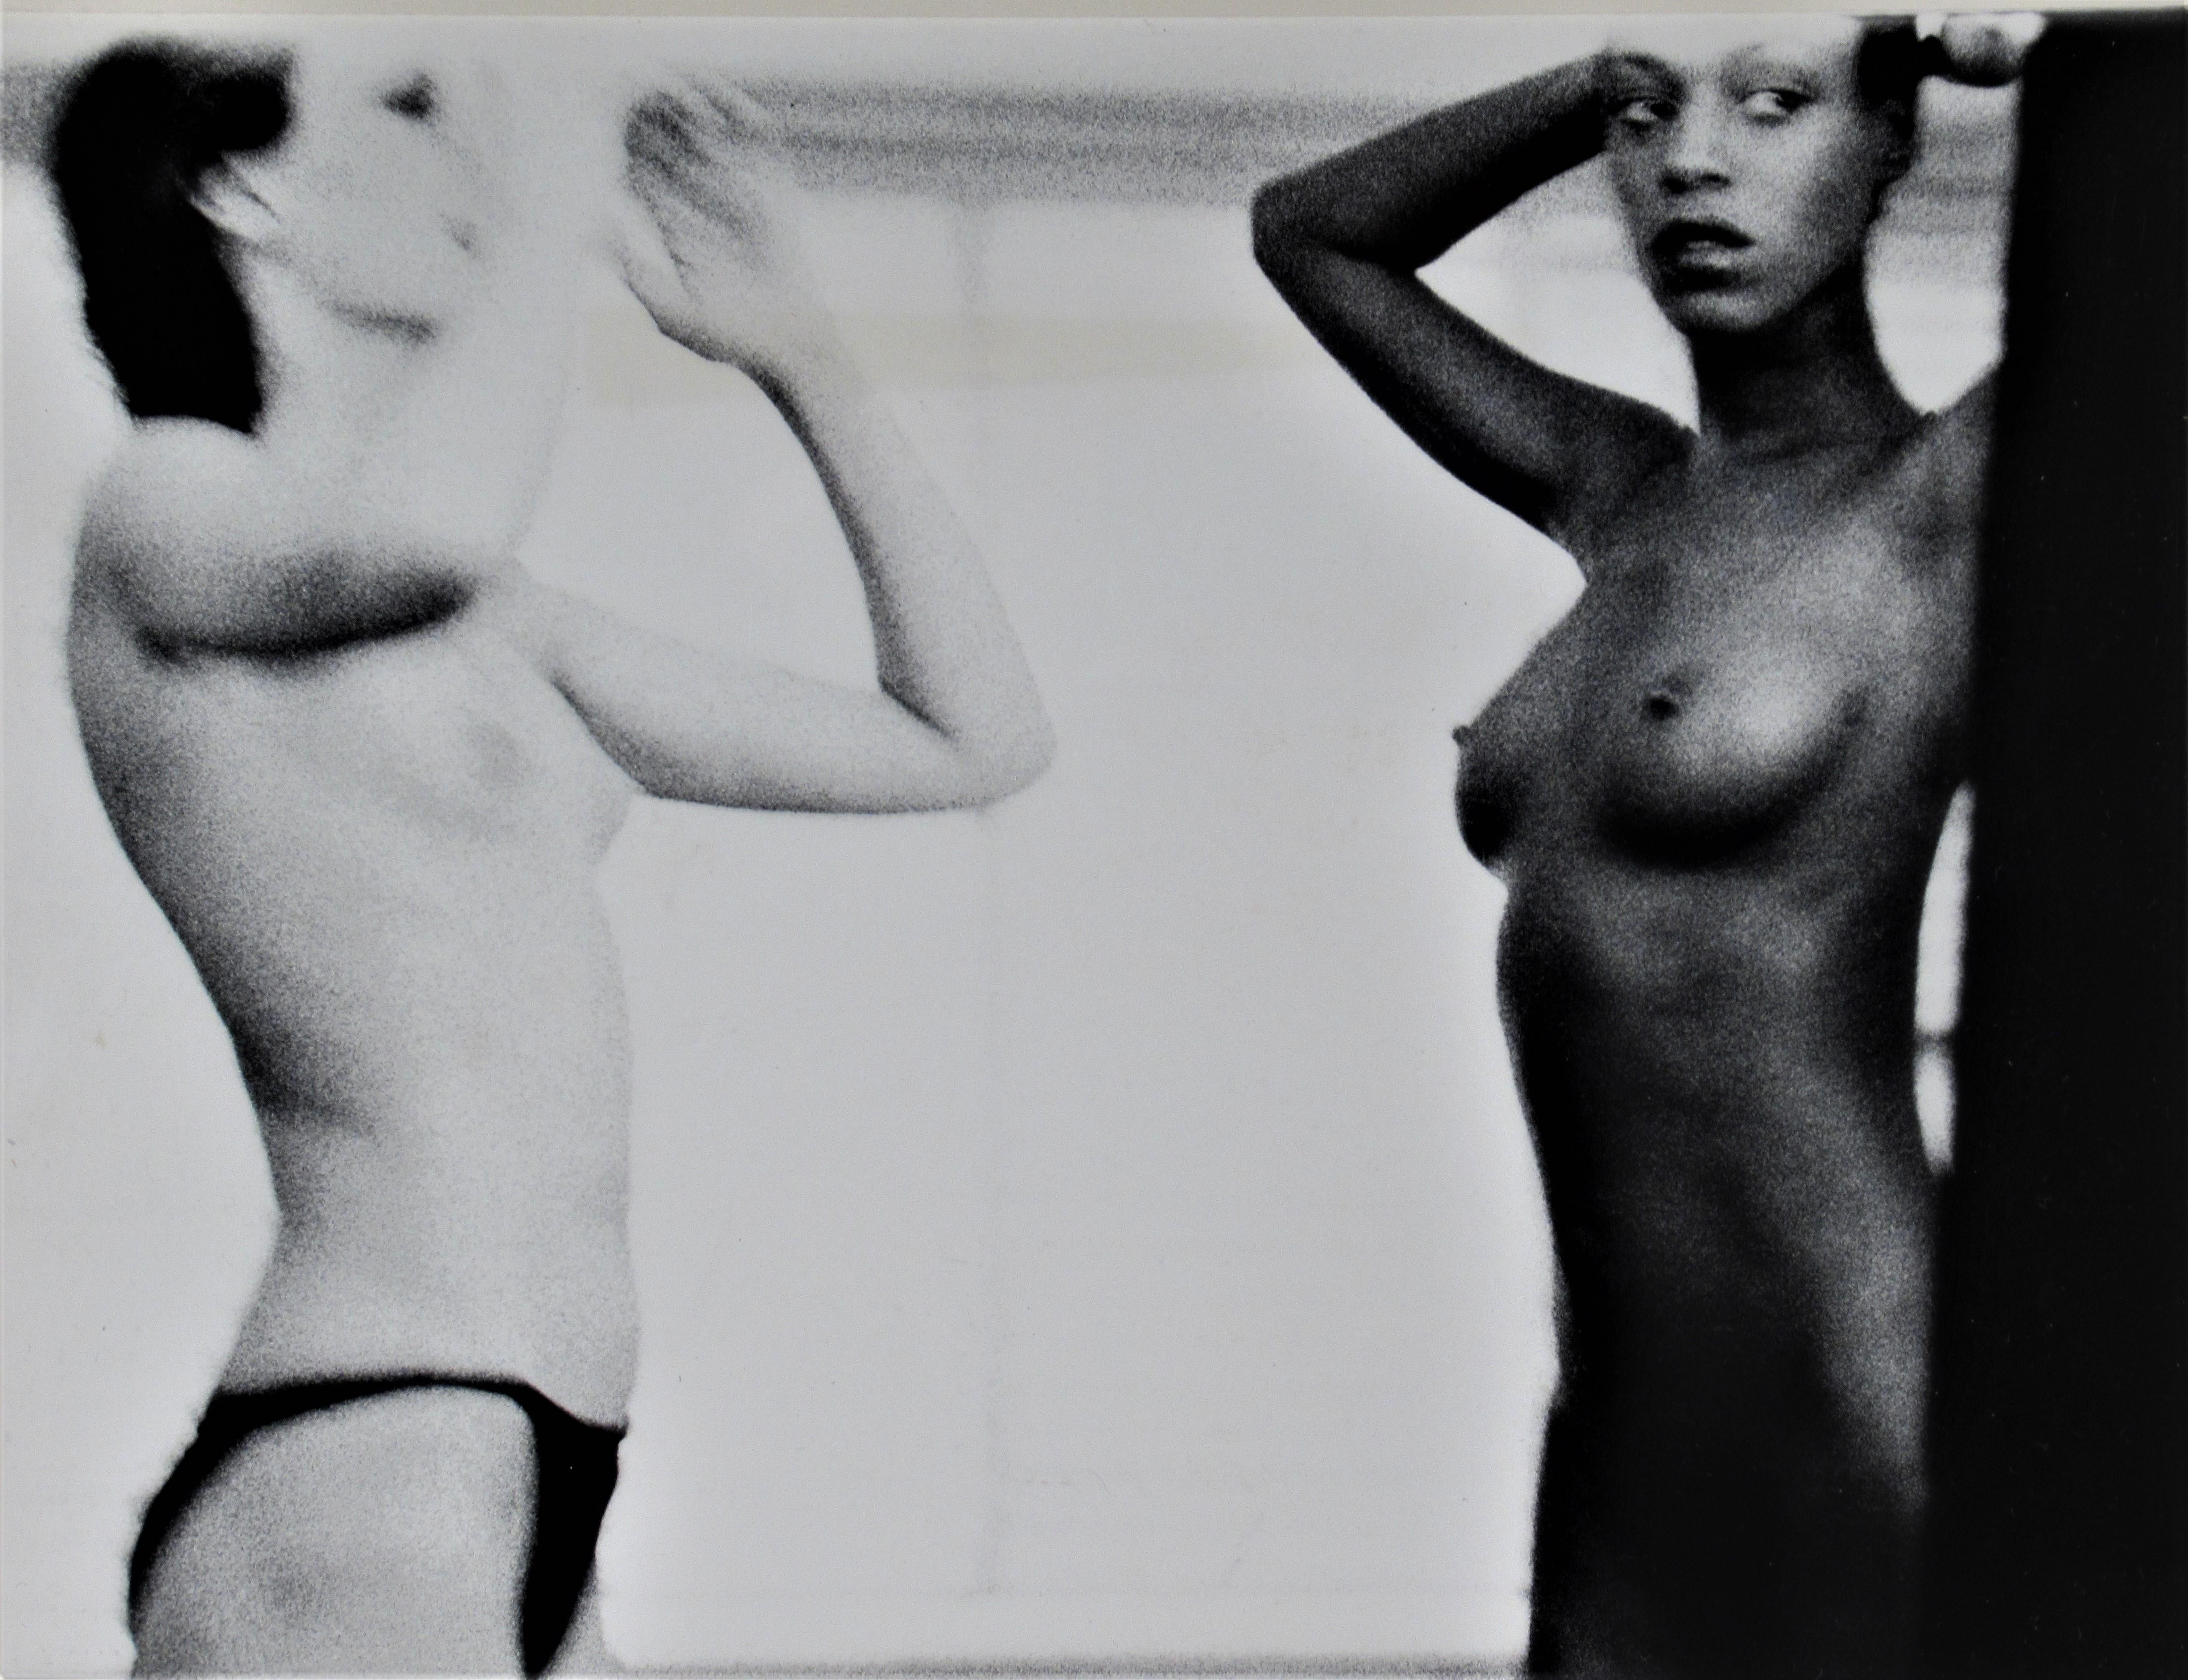 Untitled, Two Nudes - Photograph by Michael Andreas Russ